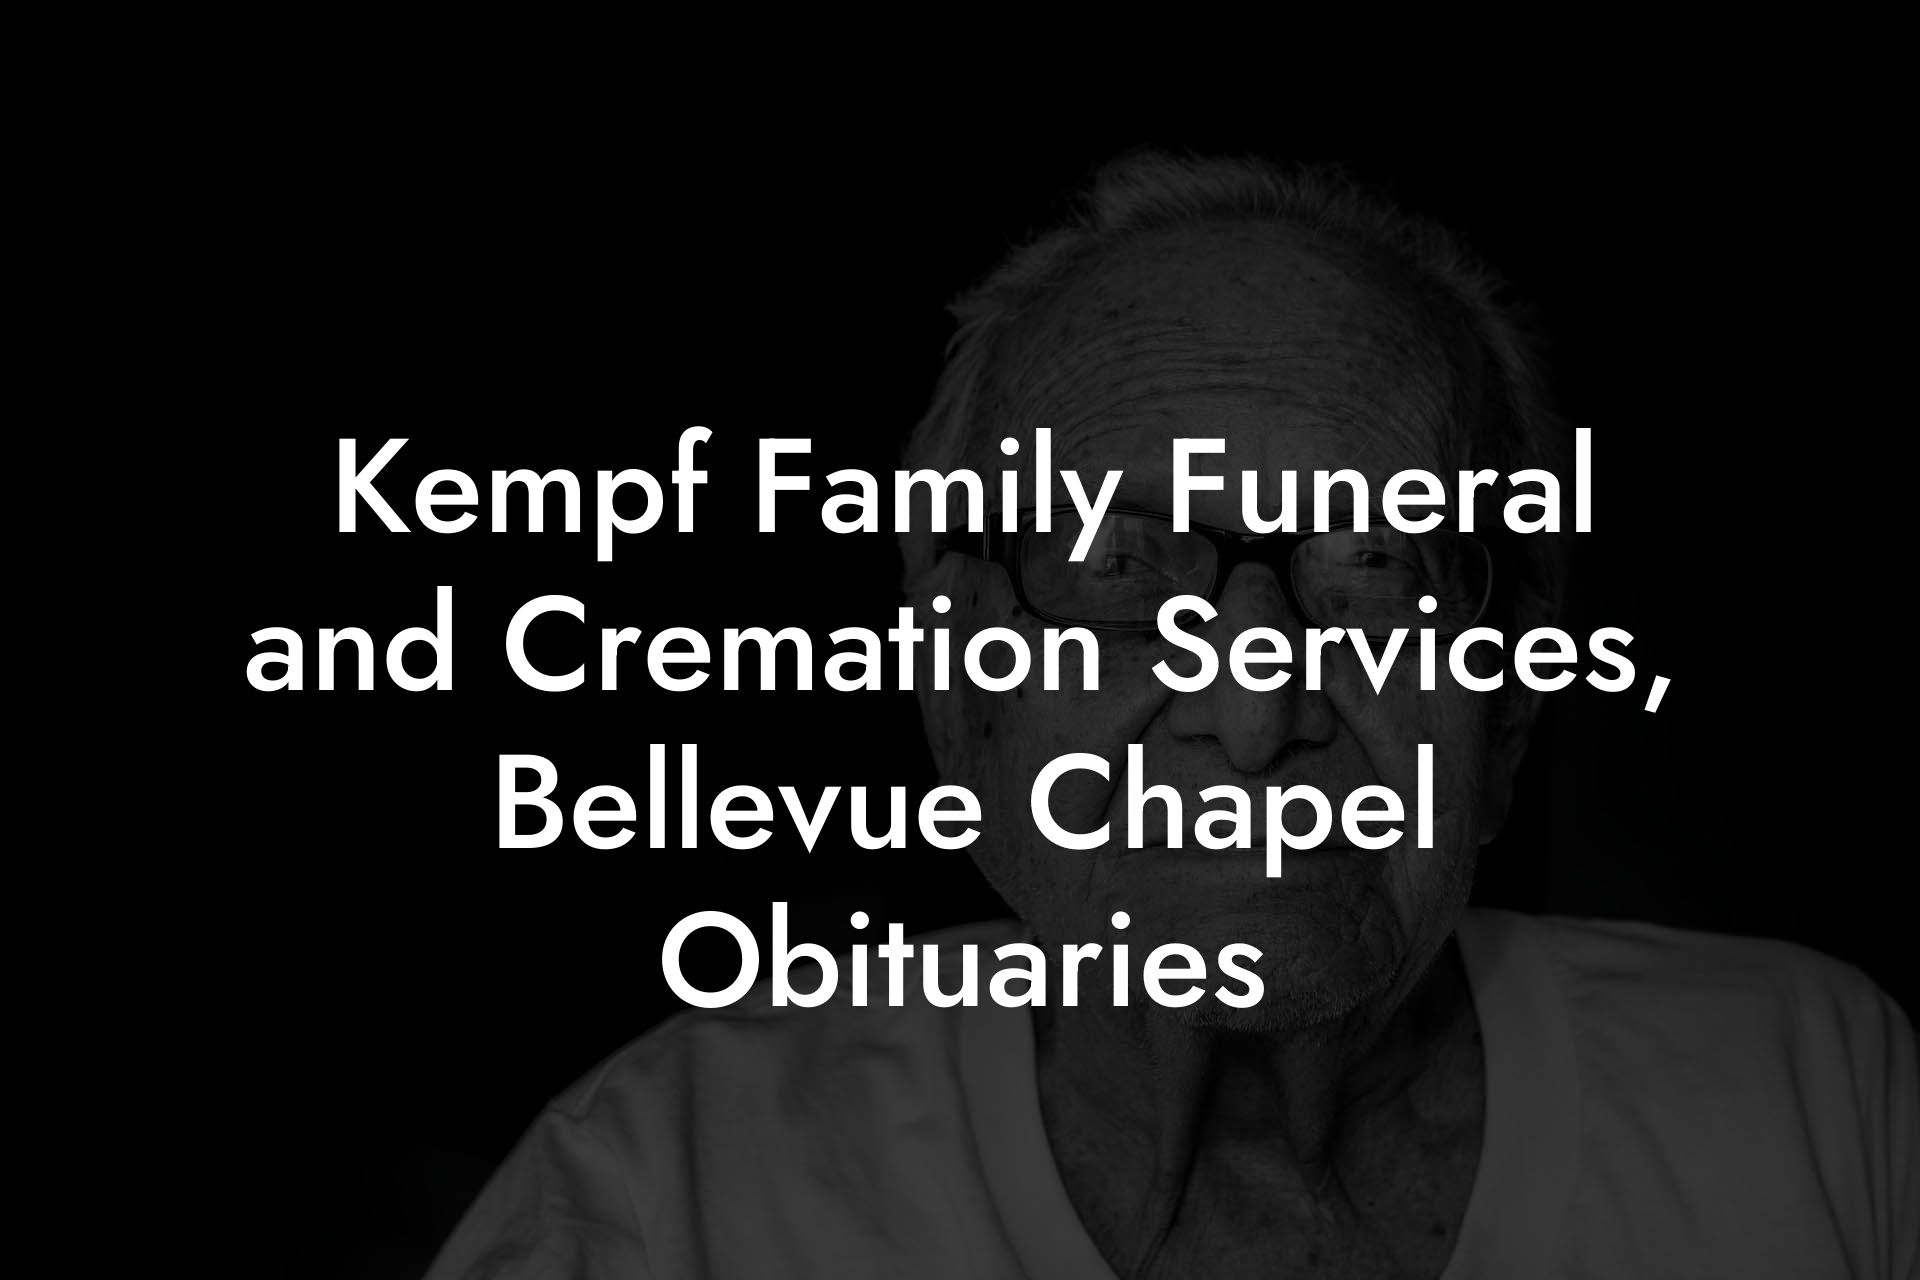 Kempf Family Funeral and Cremation Services, Bellevue Chapel Obituaries